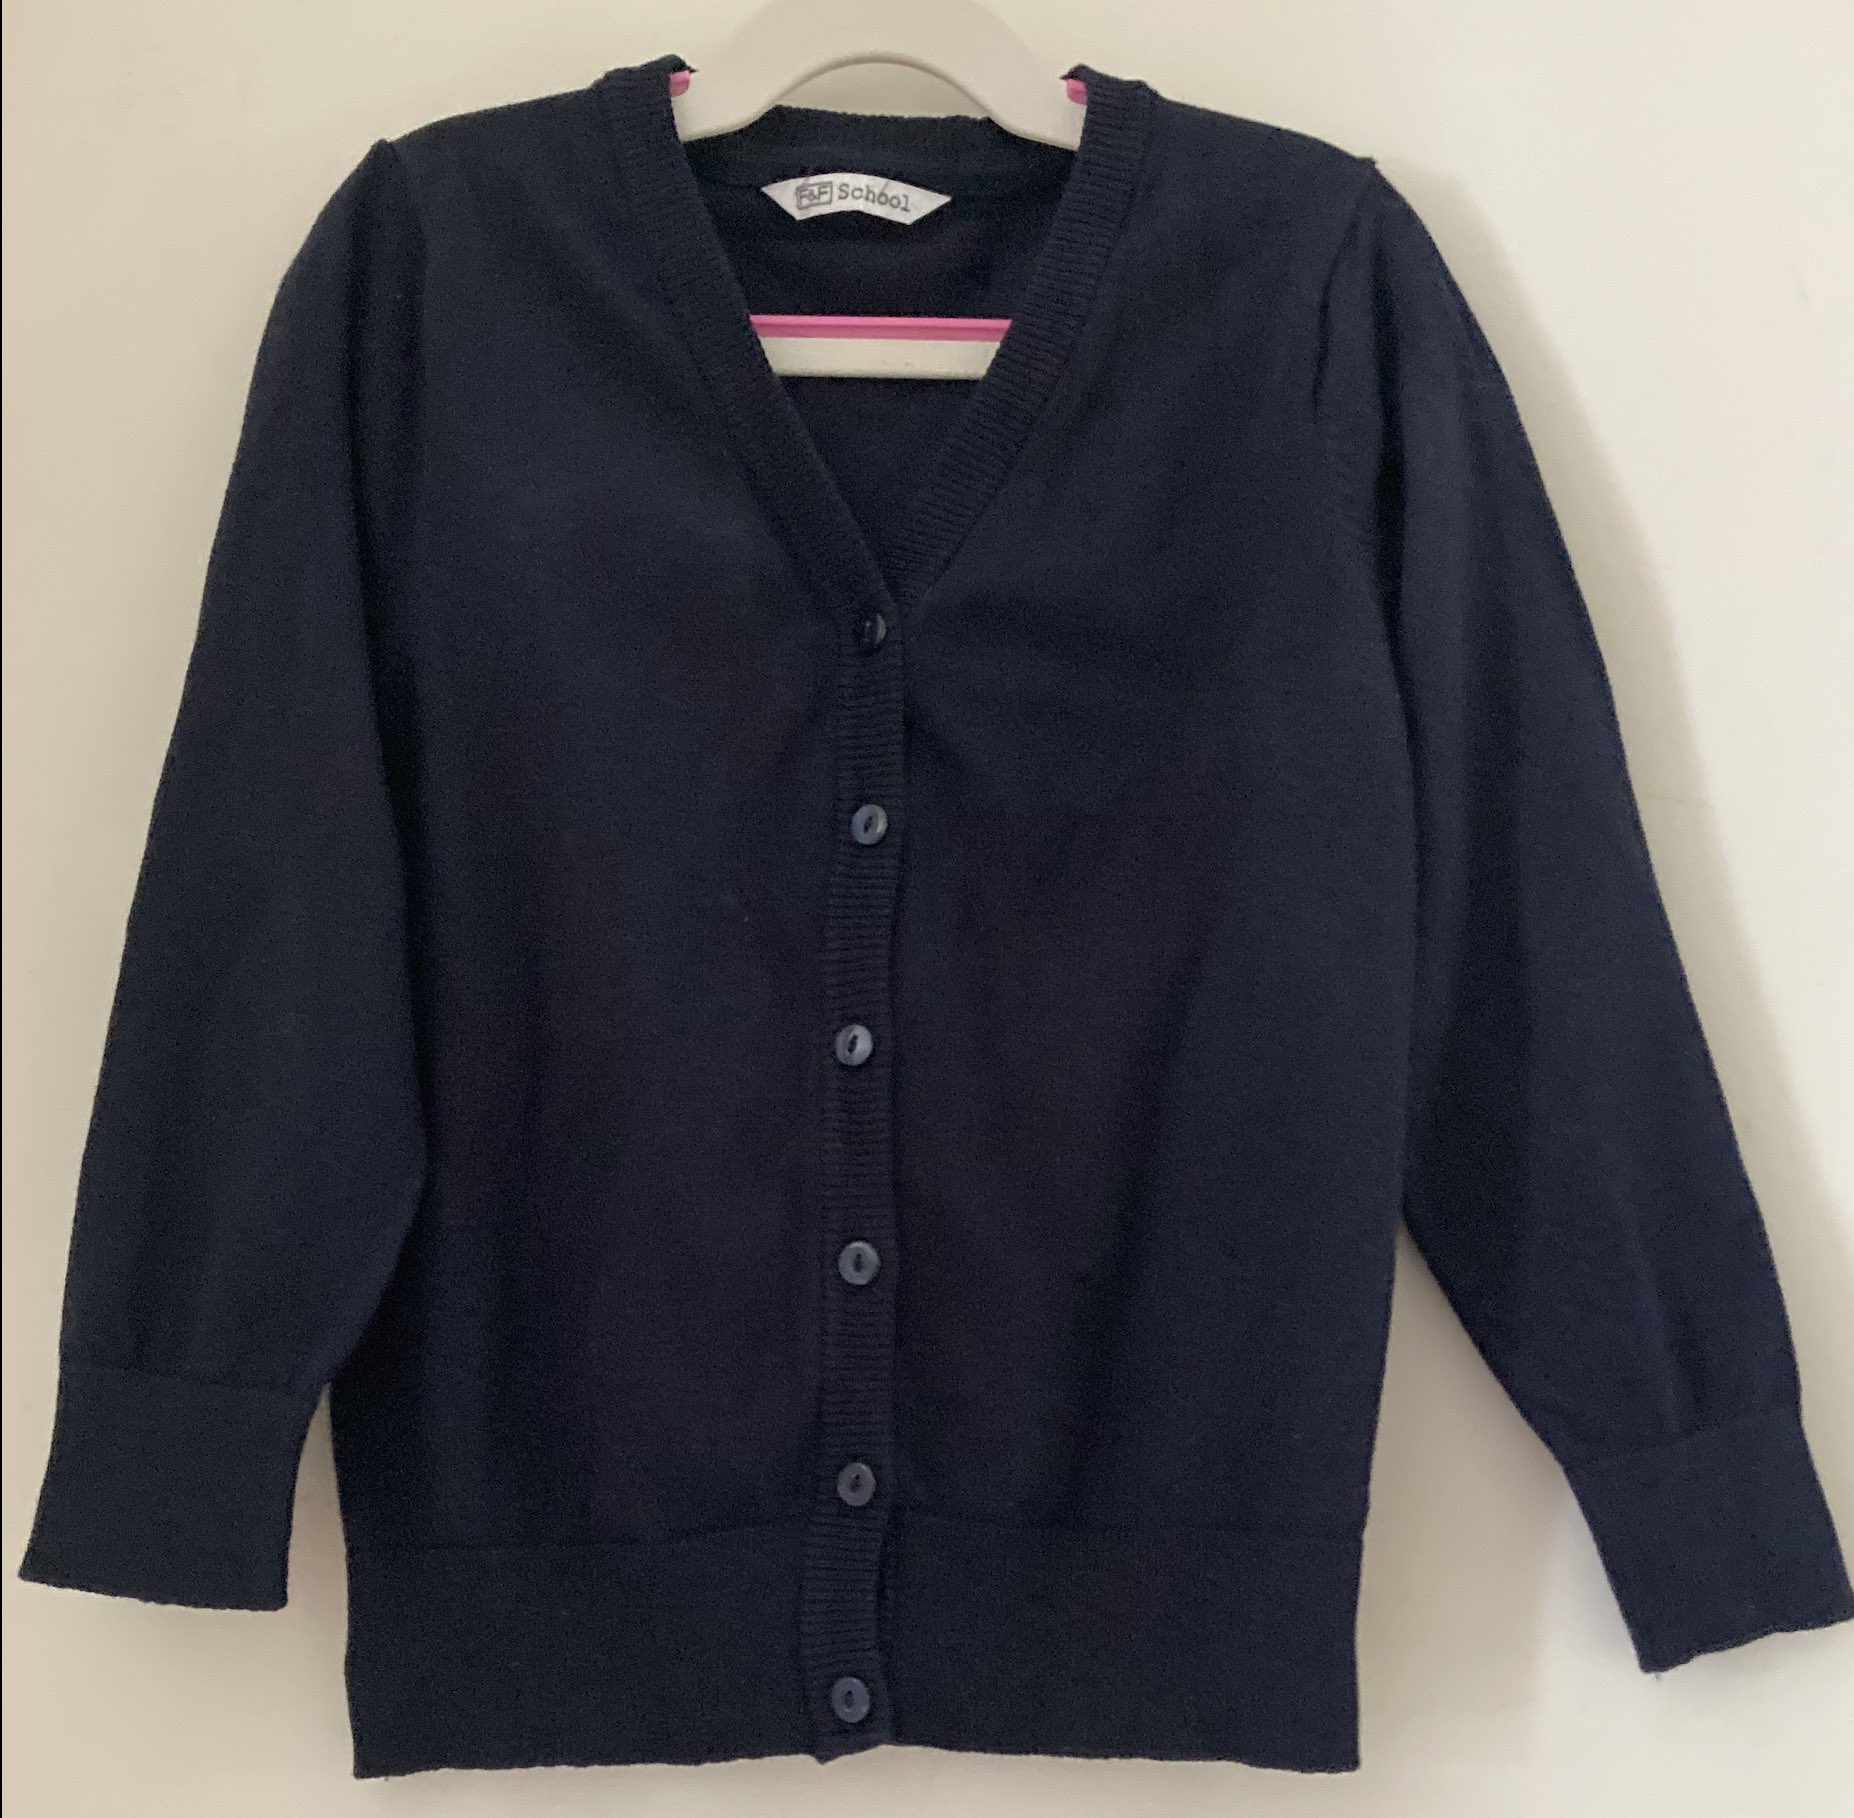 Girls' Navy V-neck Cardigan, Button Front 4-5 Y